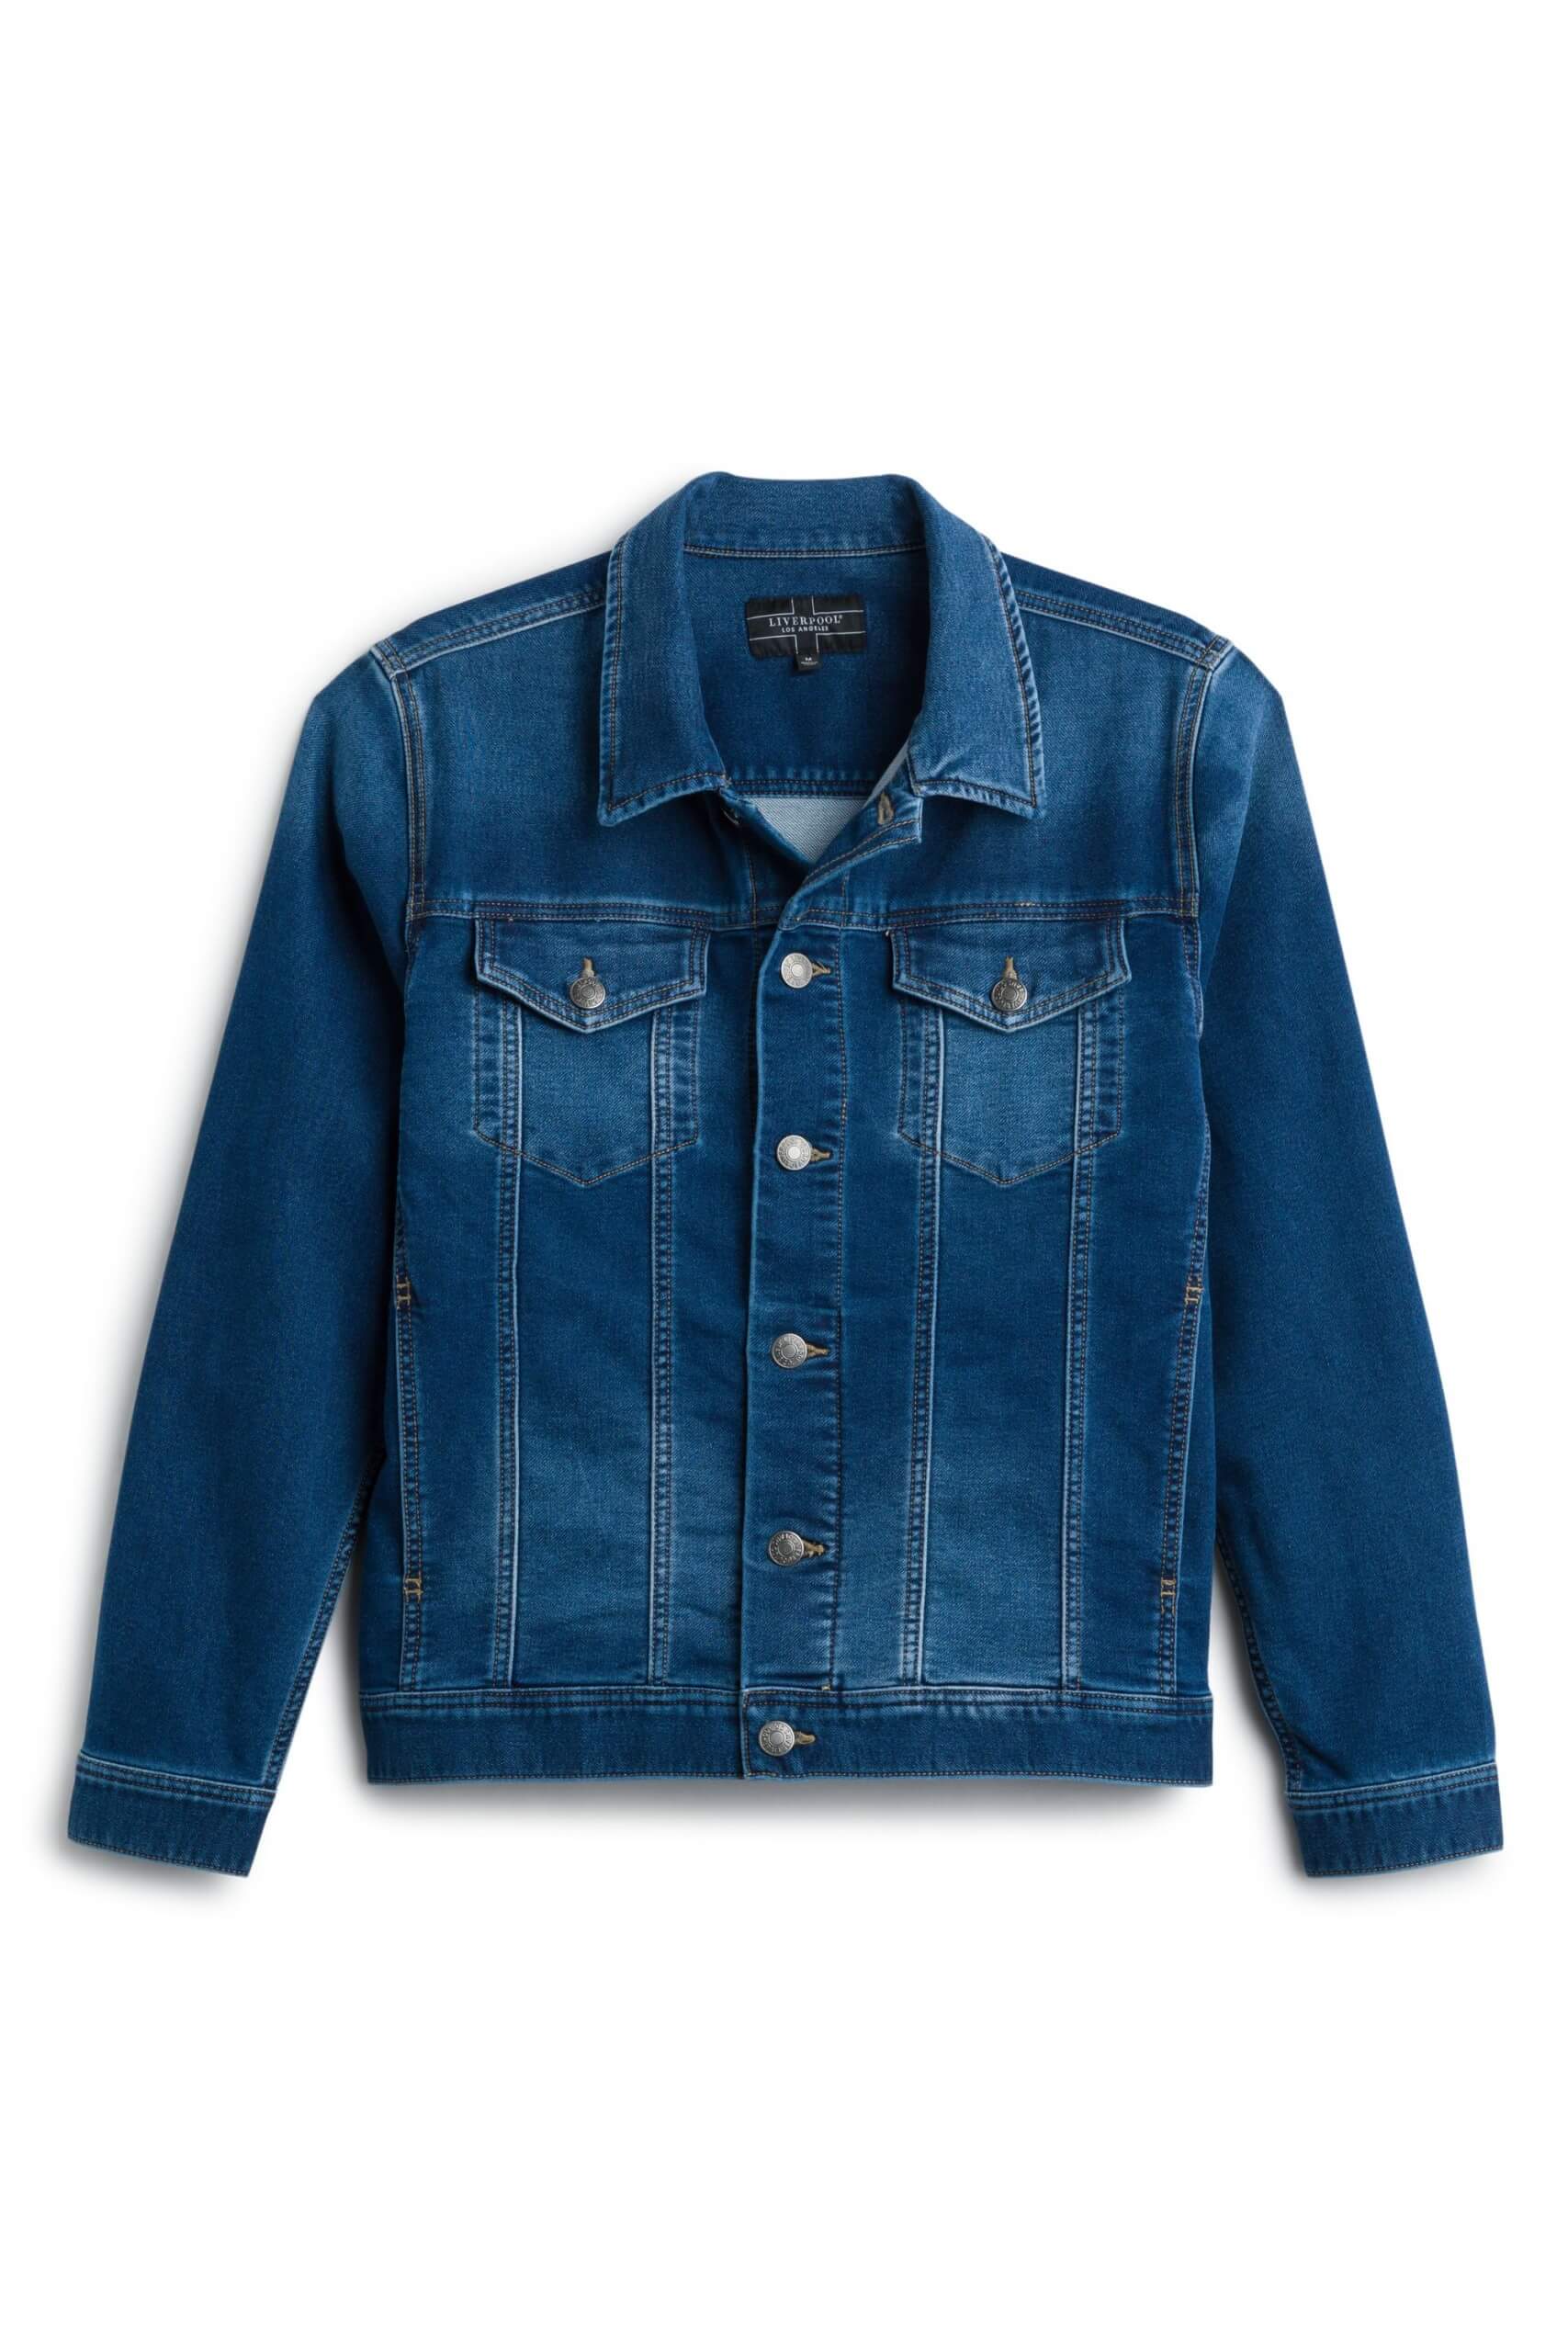 synder maskine Igangværende How to Wear a Jean Jacket | Personal Styling | Stitch Fix